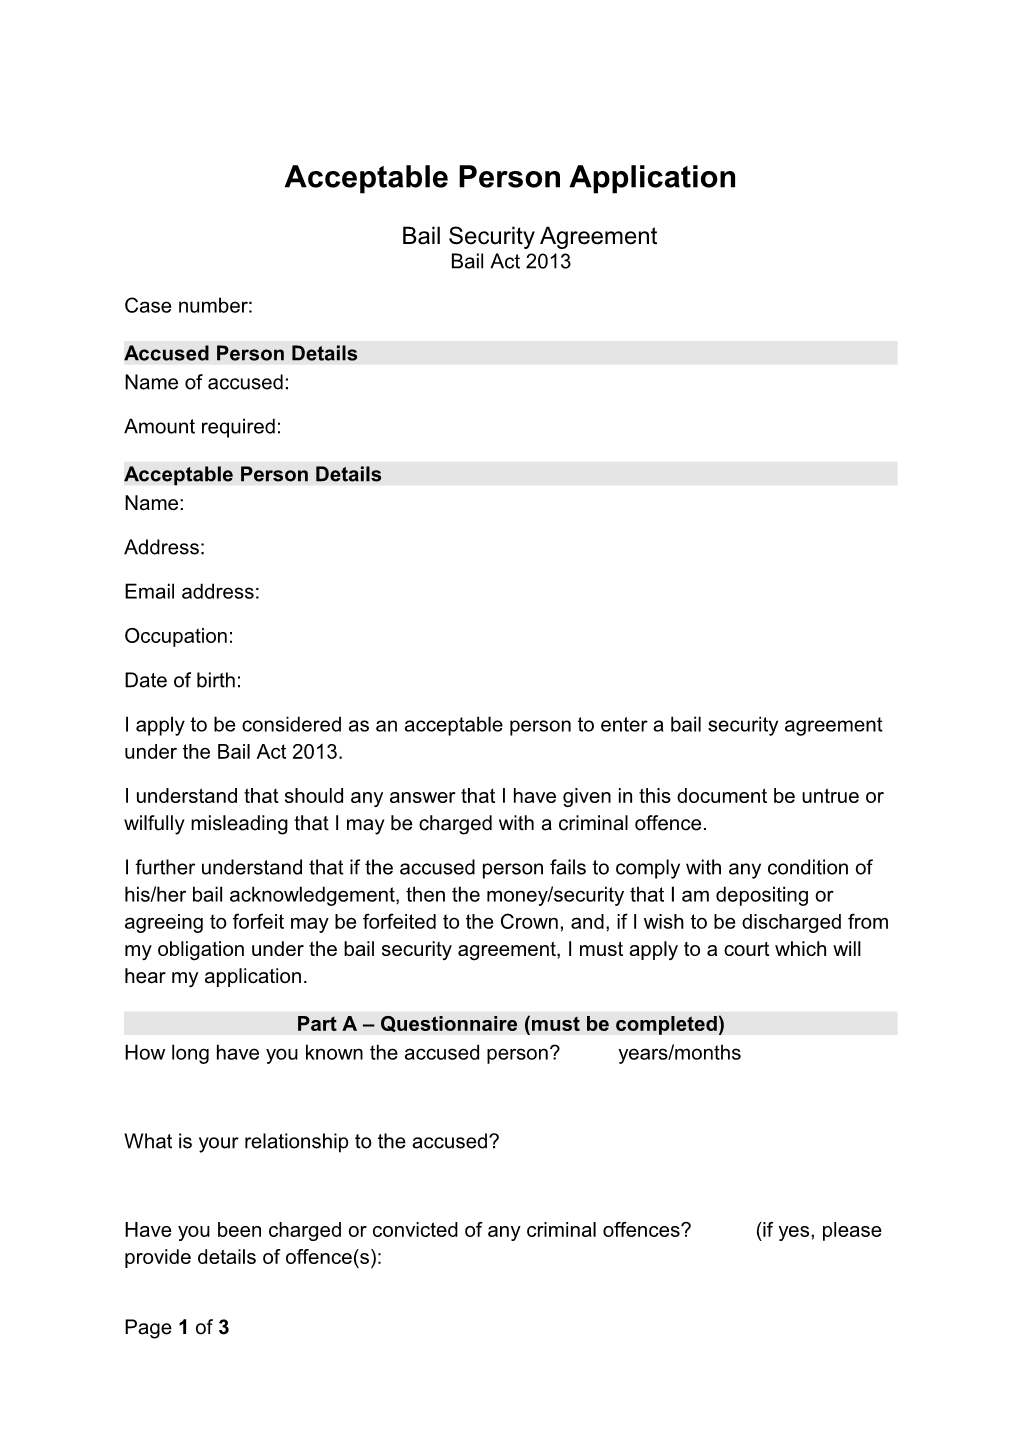 Acceptable Person Application - Bail Security Agreement